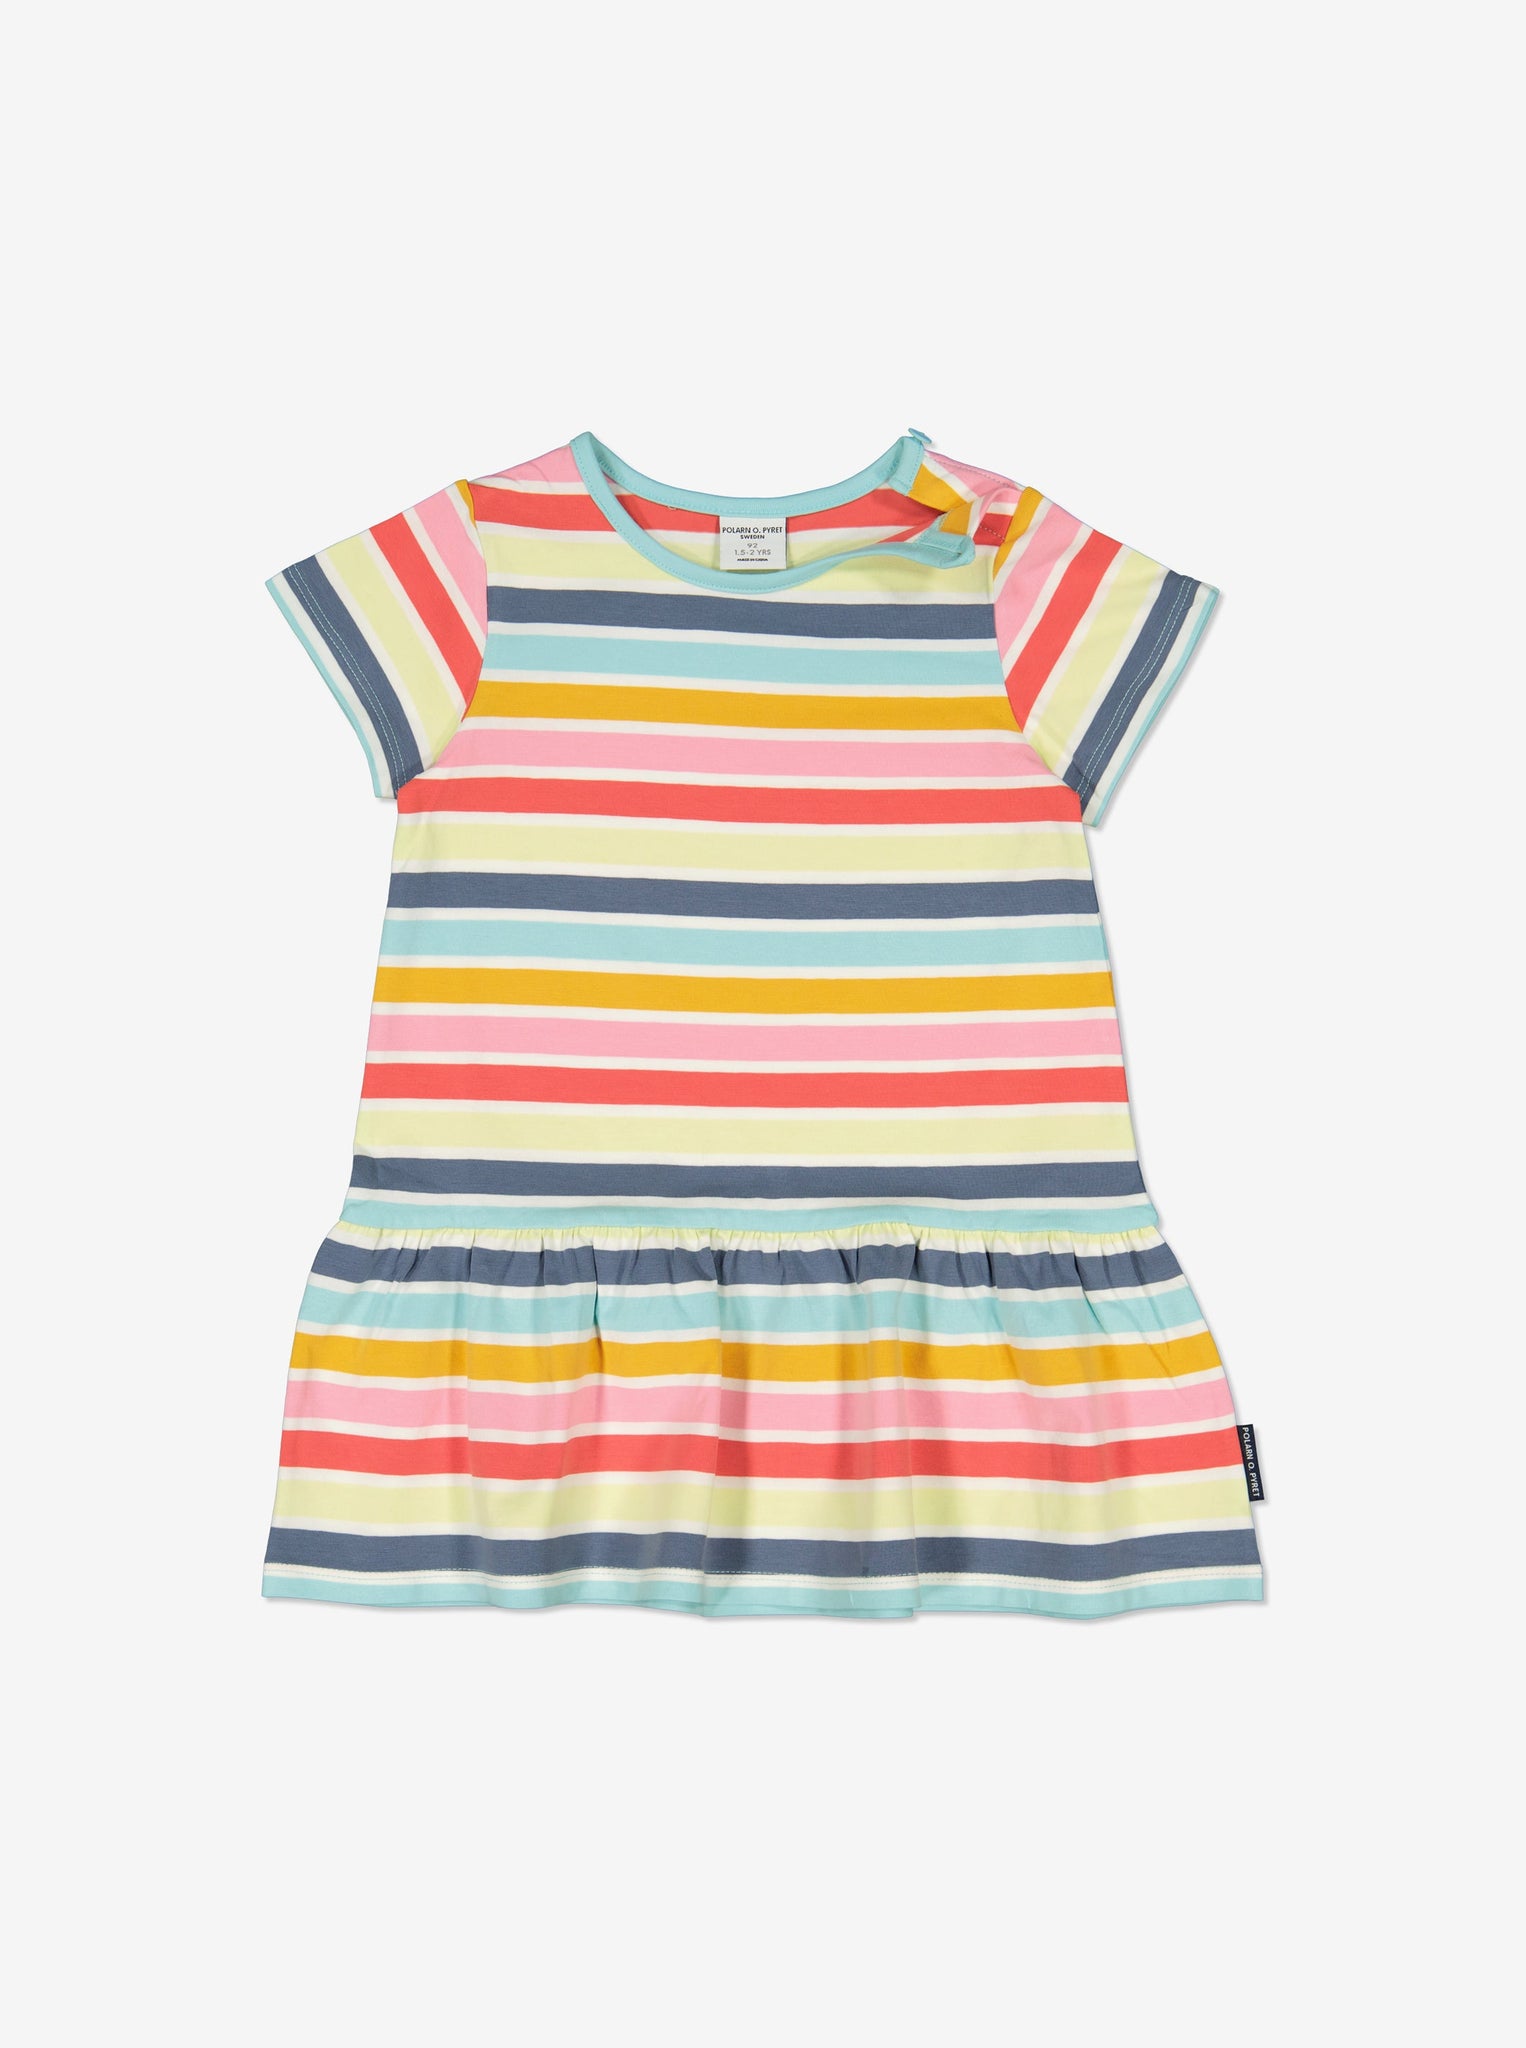 Organic Cotton Striped Girls Dress from Polarn O. Pyret Kidswear. Made using sustainable sourced materials.